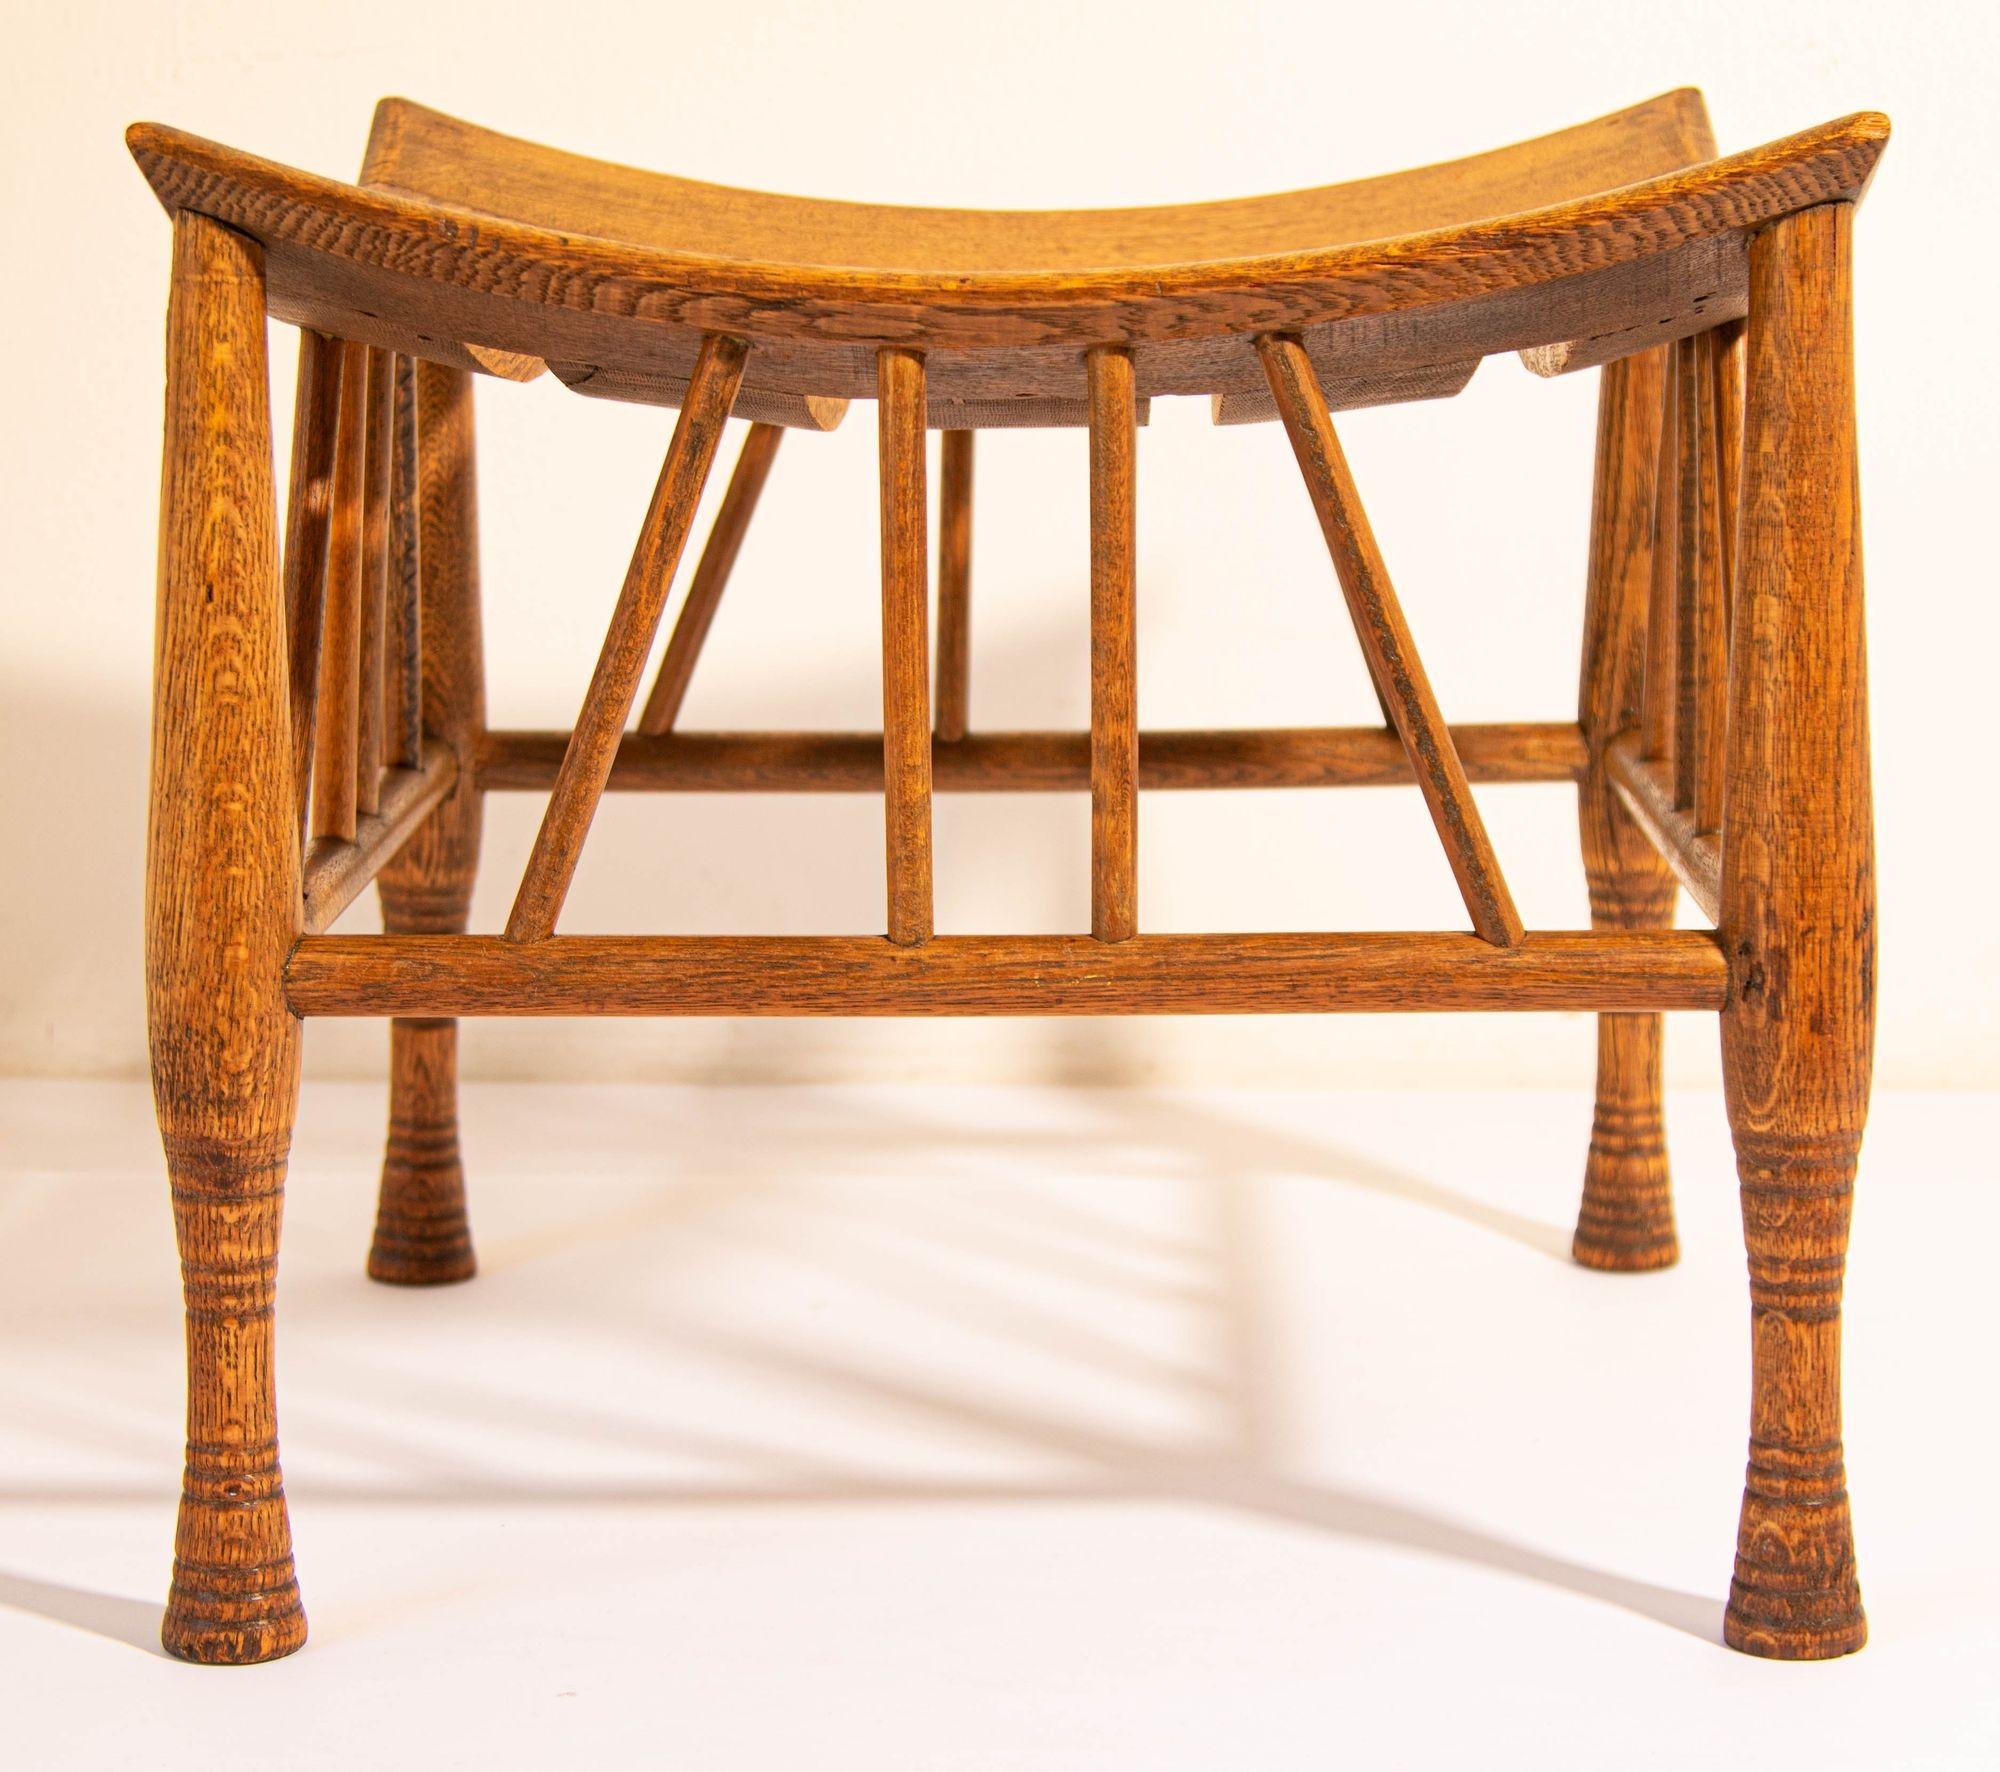 1920s Egyptian Revival Light Slat Oak Thebes Stool, Liberty & Co attributed.
Walnut Egyptian Revival Thebe Stool.
Liberty & Company London /Leonard Wyburd.
This vintage 'Thebes' stool, produced within the early 20th century period is attributed to